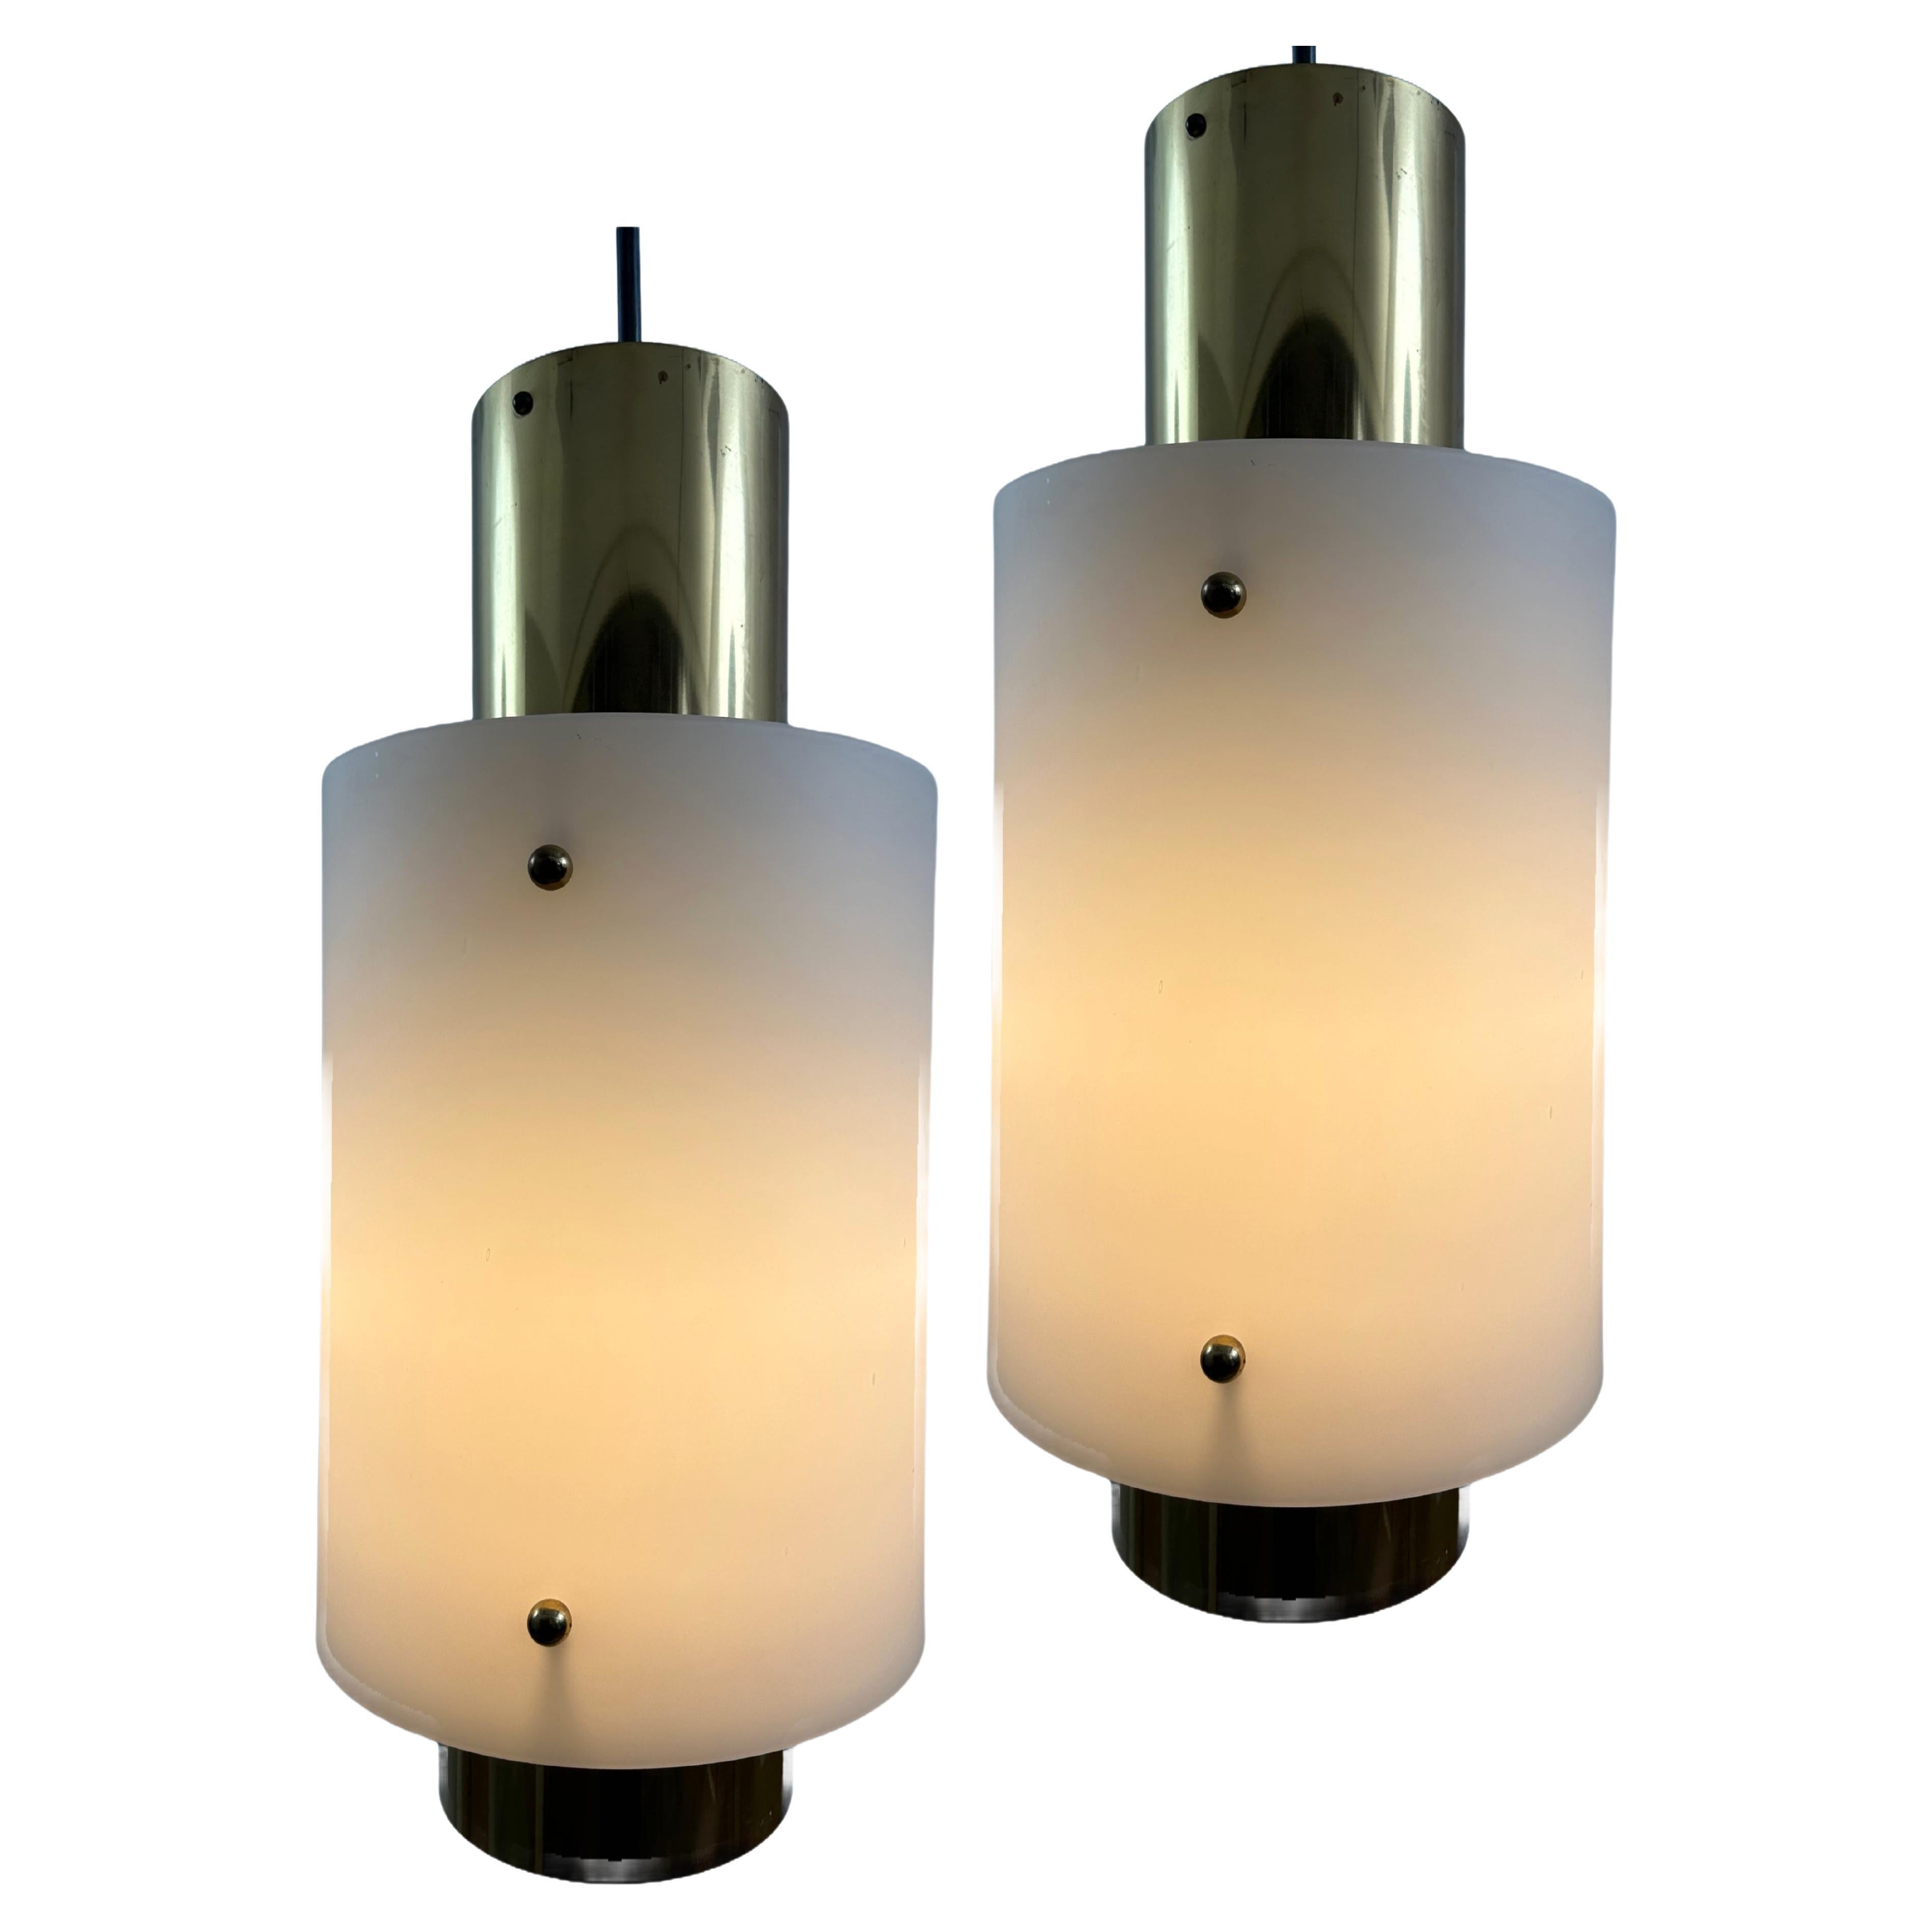 Pair of Large Size Paavo Tynell Pendant Lights by Taito Oy - 1950s For Sale